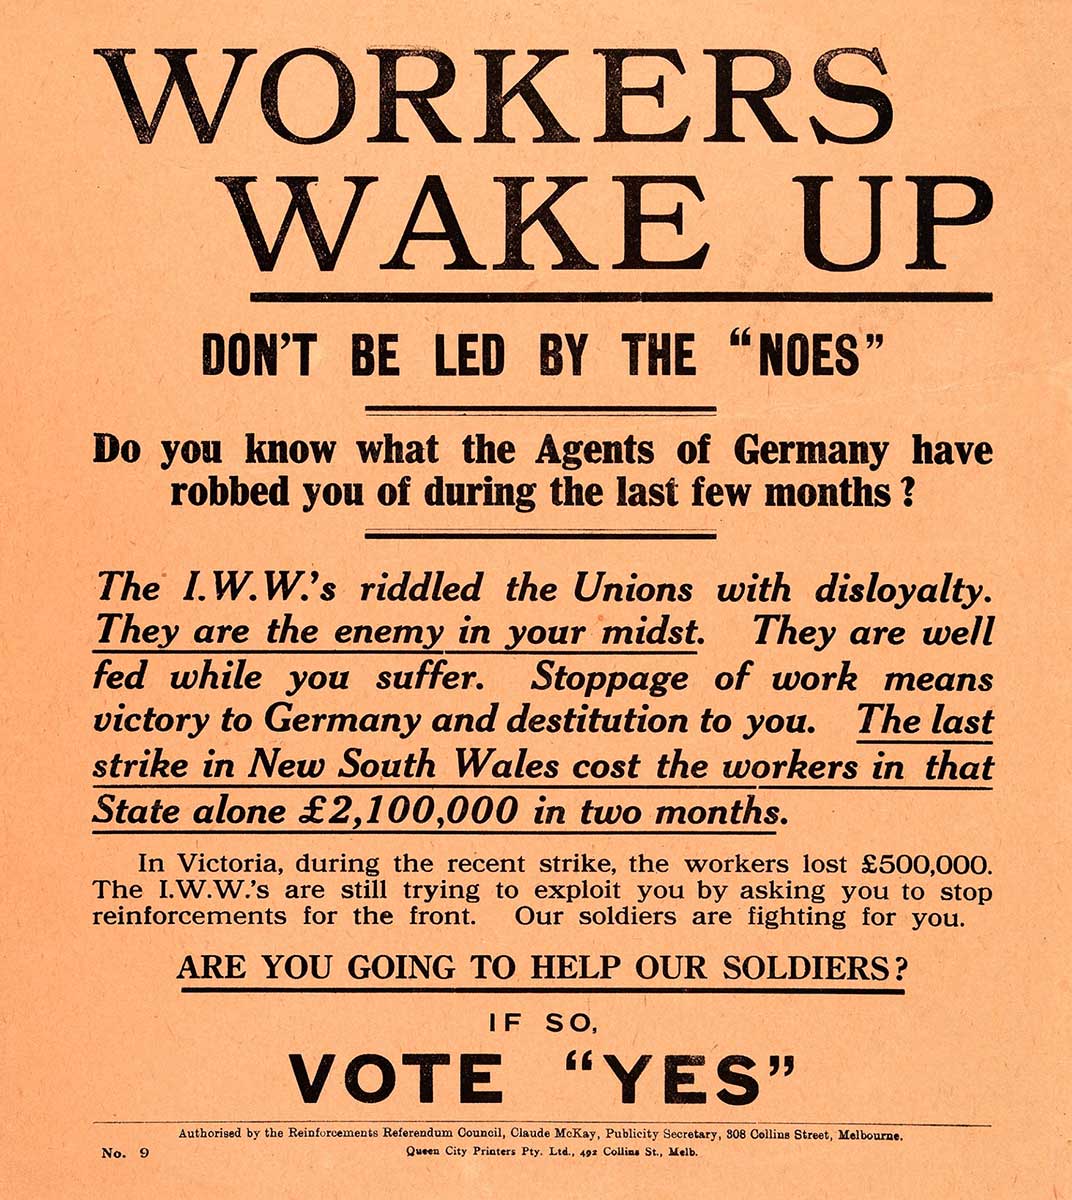 Leaflet titled 'WORKERS WAKE UP' and below that 'DON'T BE LED BY THE "NOES"'. Further down the bottom is text 'ARE YOU GOING TO HELP OUR SOLDIERS? IF SO, VOTE "YES"'.